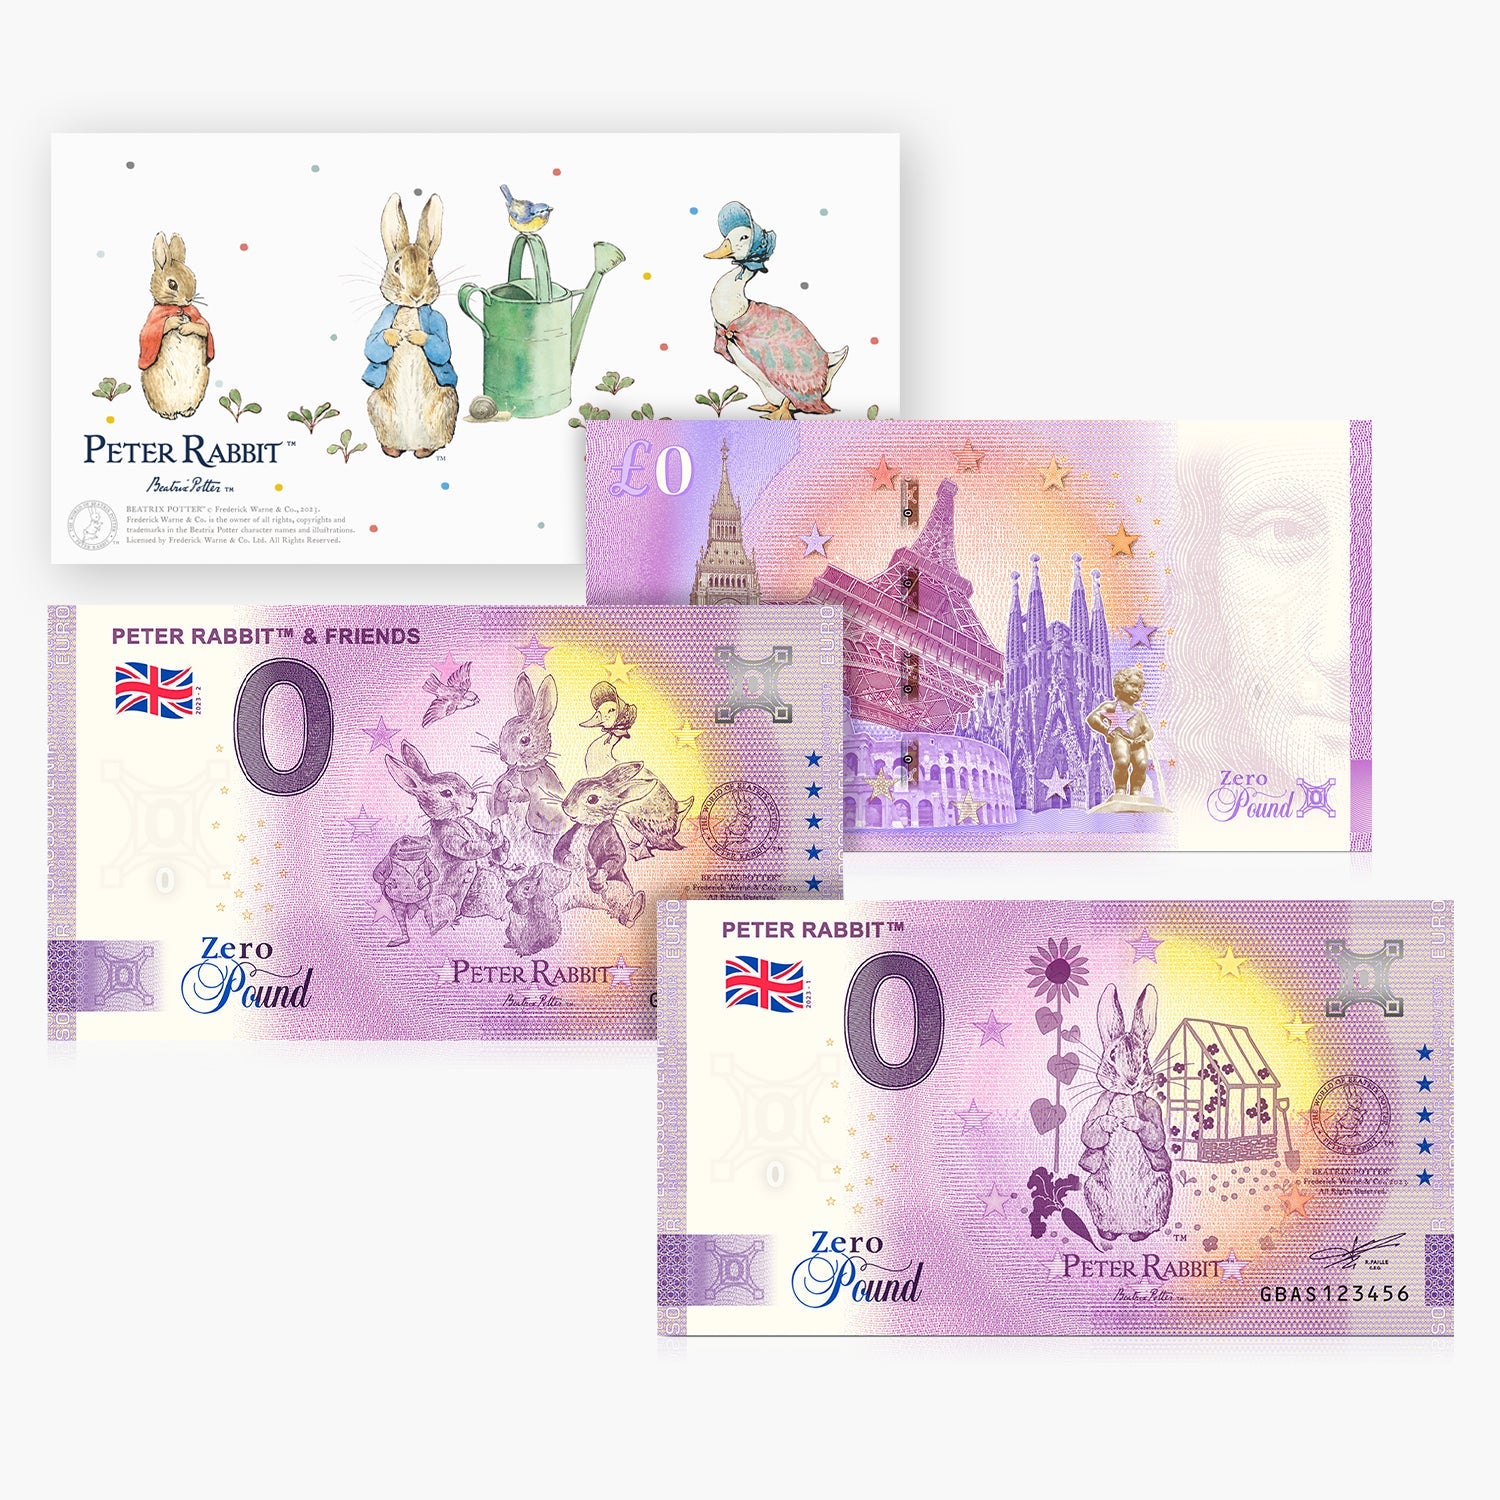 The World of Peter Rabbit Shaped Coin & Banknote Bundle